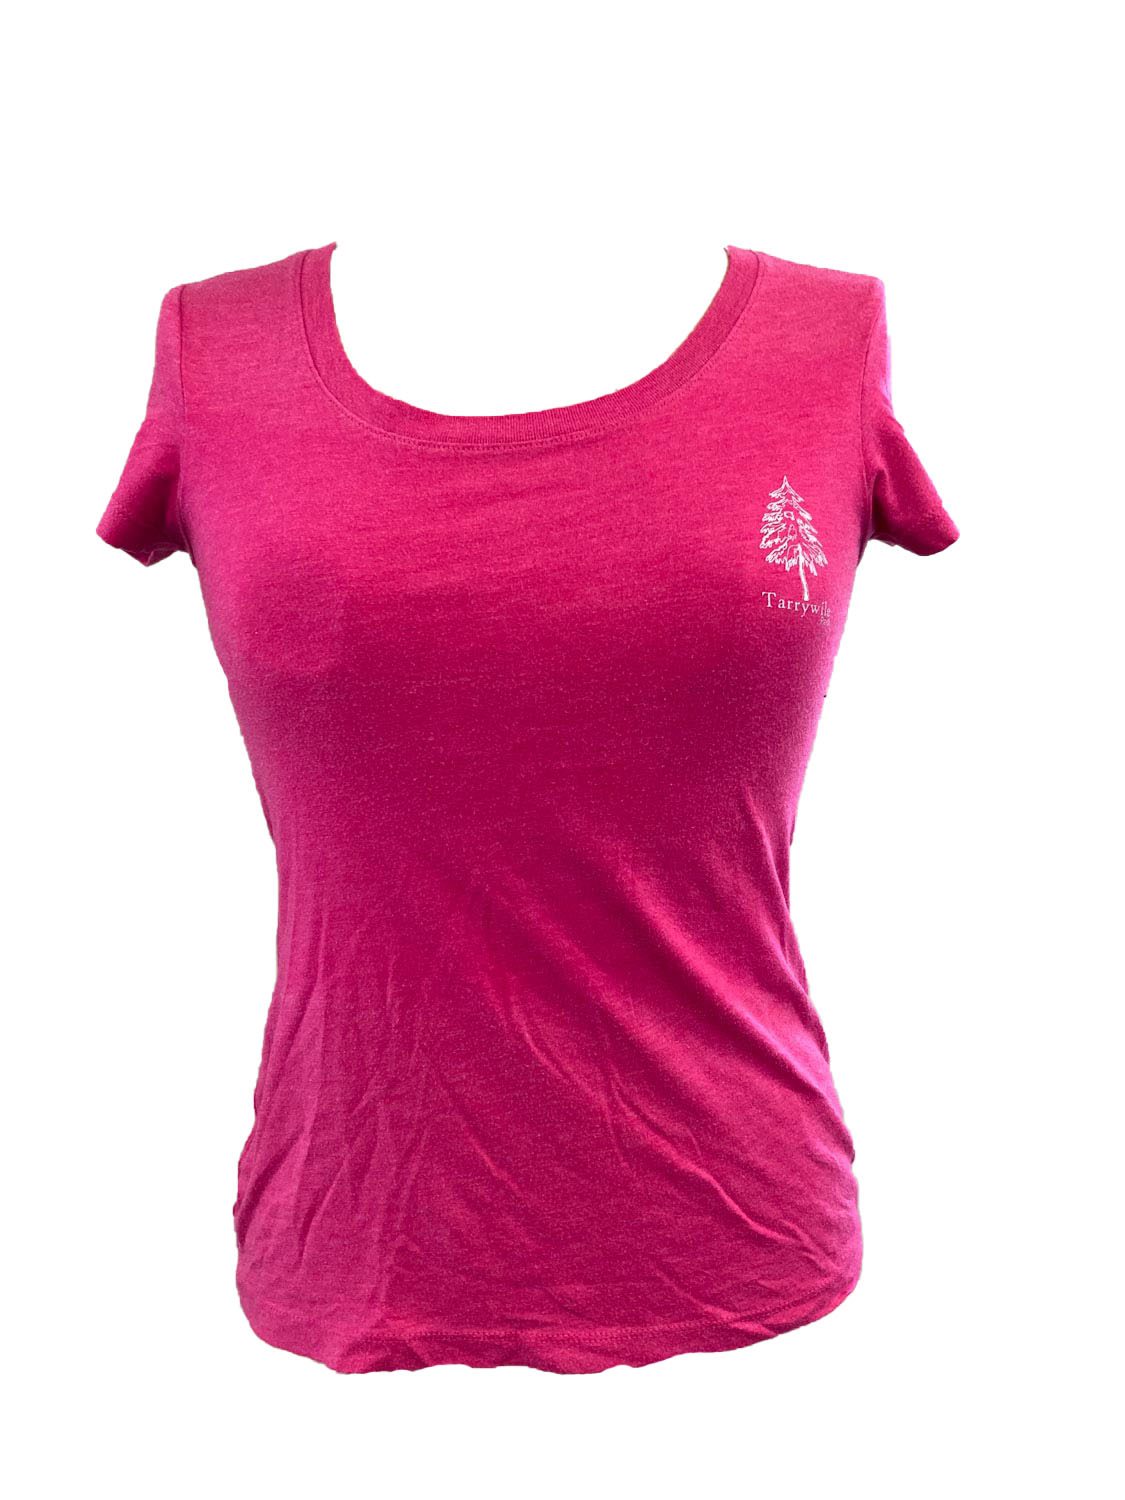 berry colored t-shirt with white tarrywile park logo